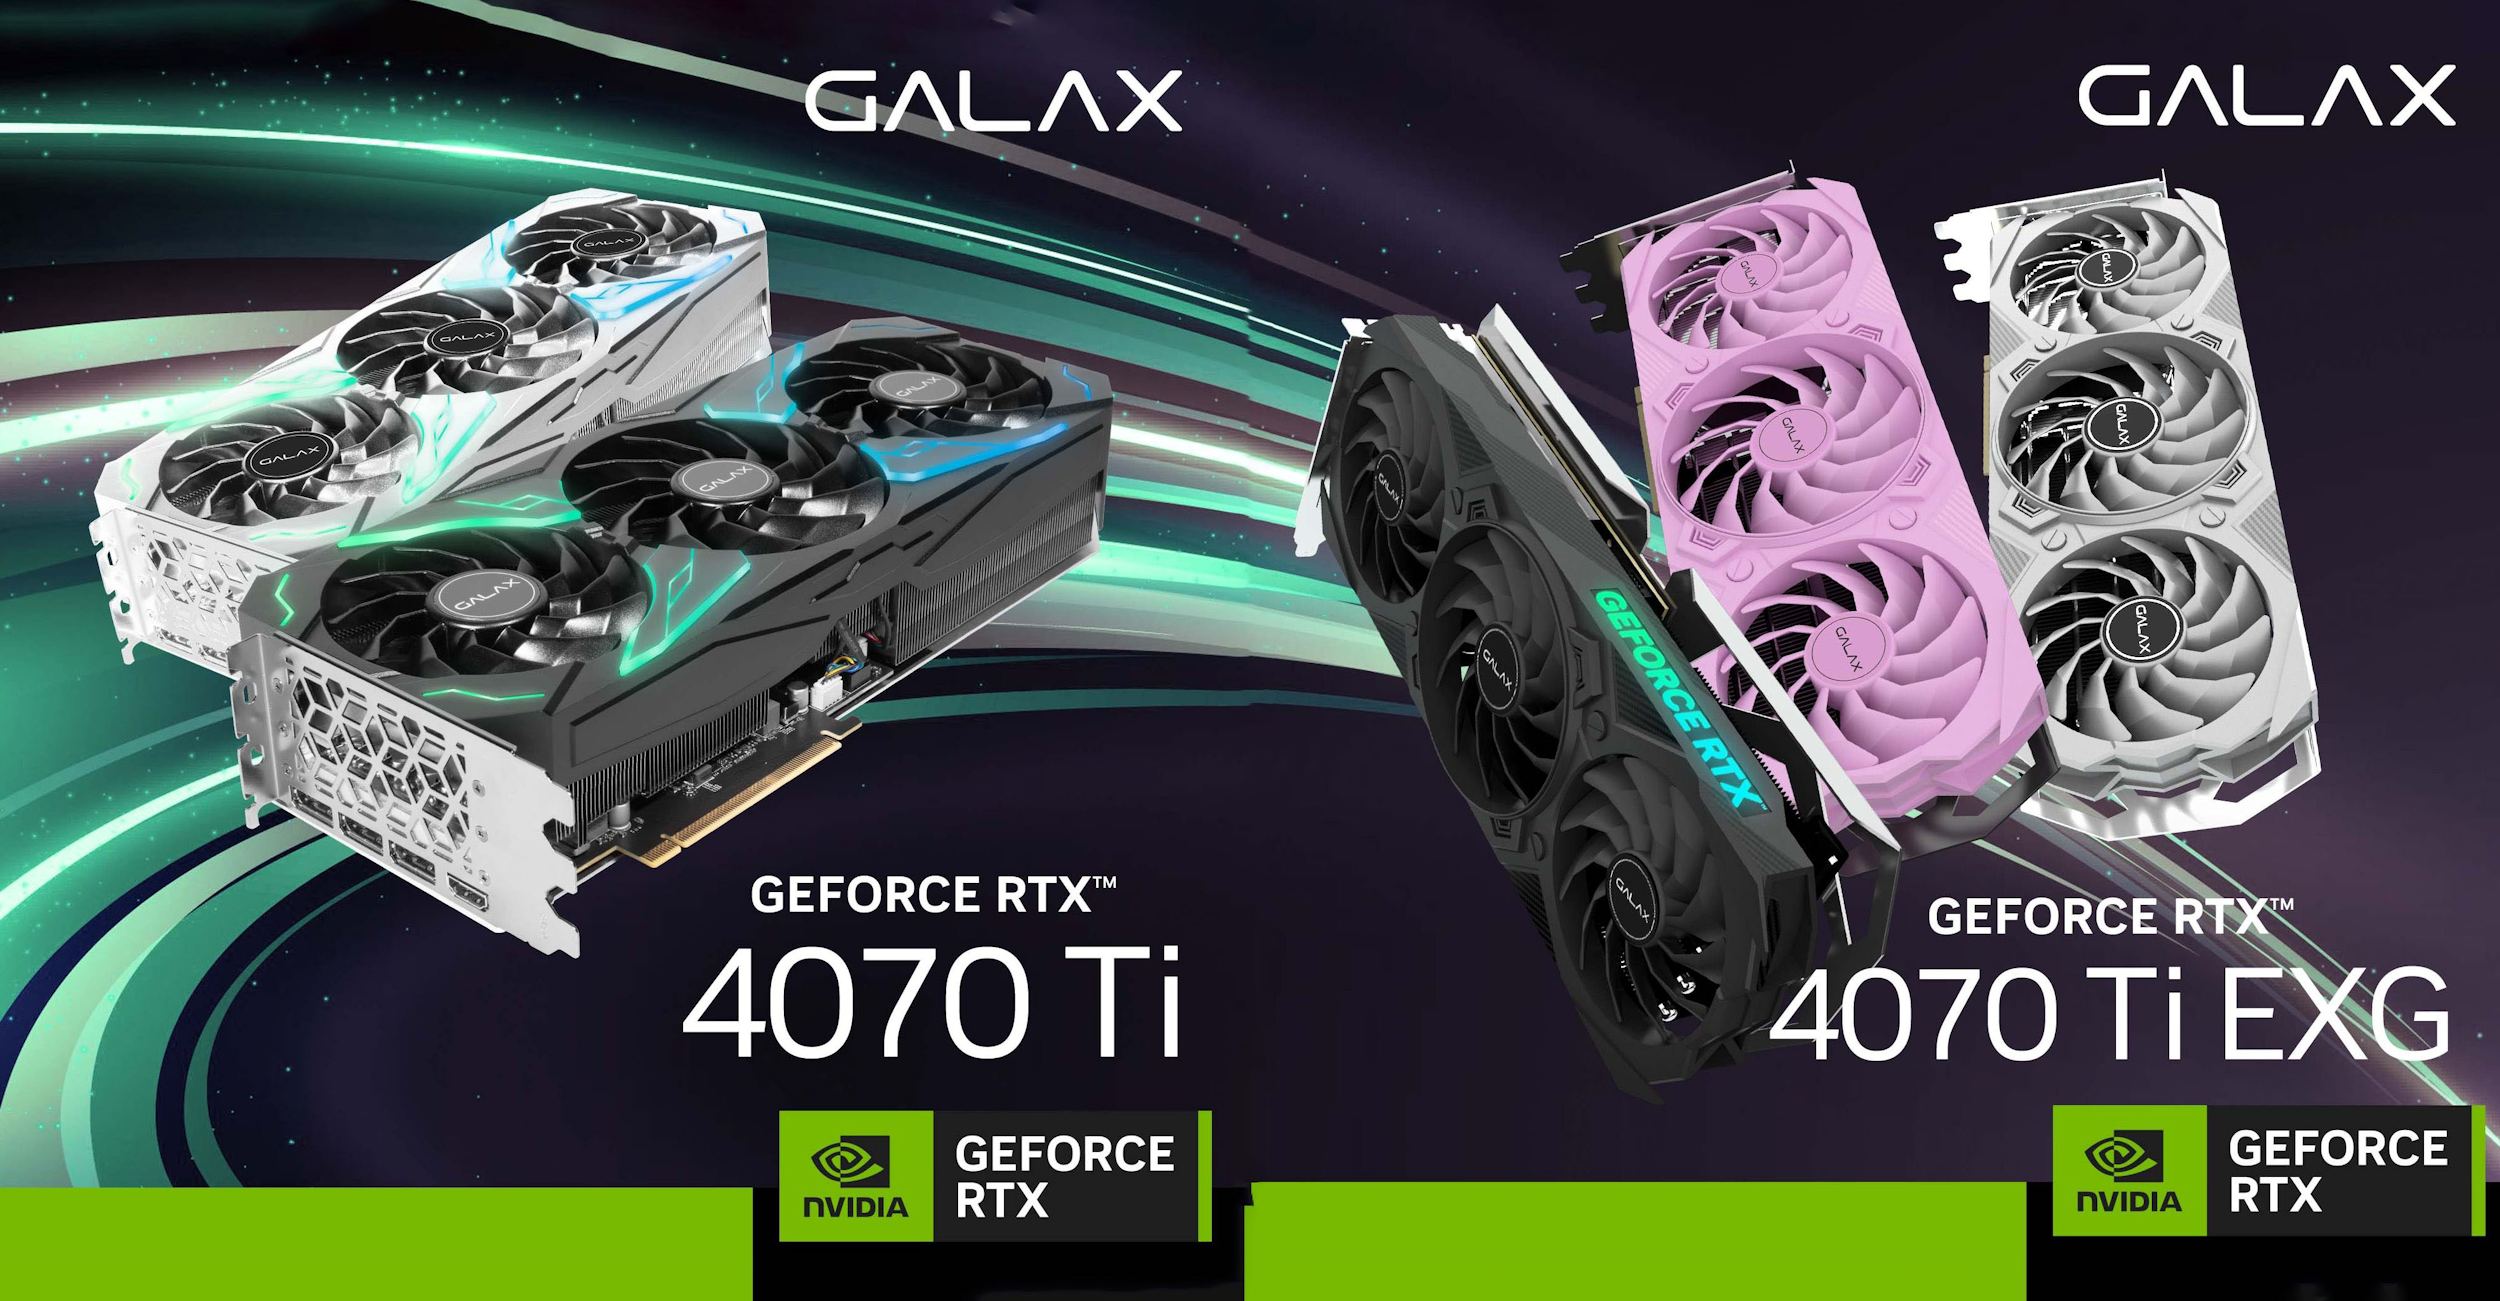 GALAX announces GeForce RTX 4070 Ti graphics cards, including the